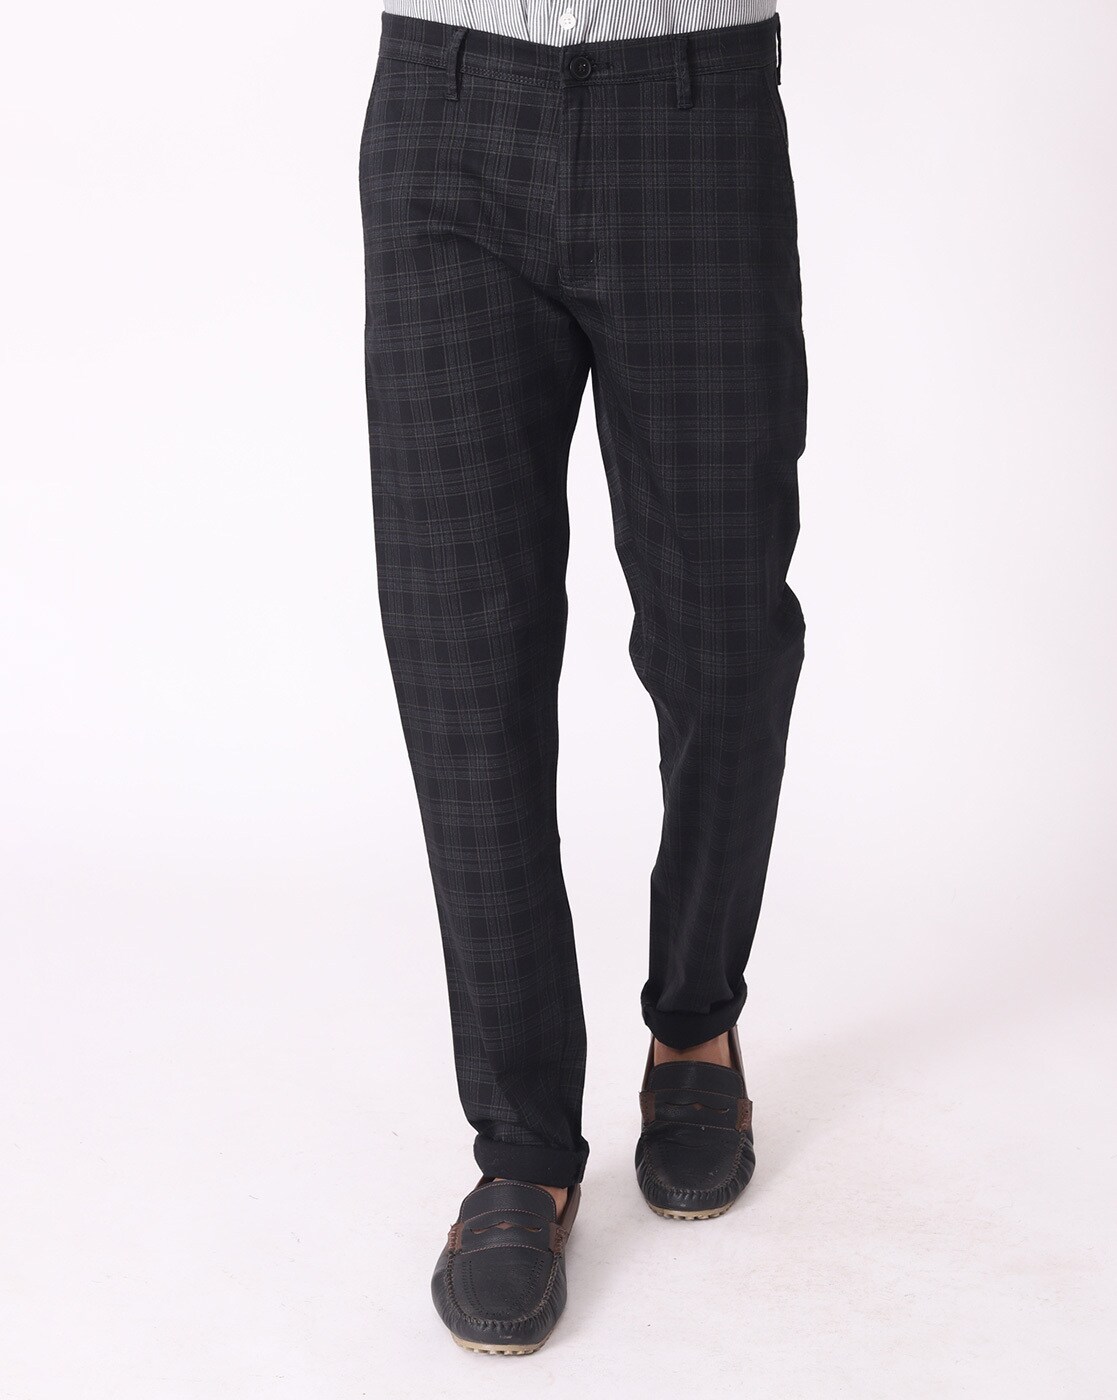 Navy Check Skinny Trousers  Trousers  PrettyLittleThing